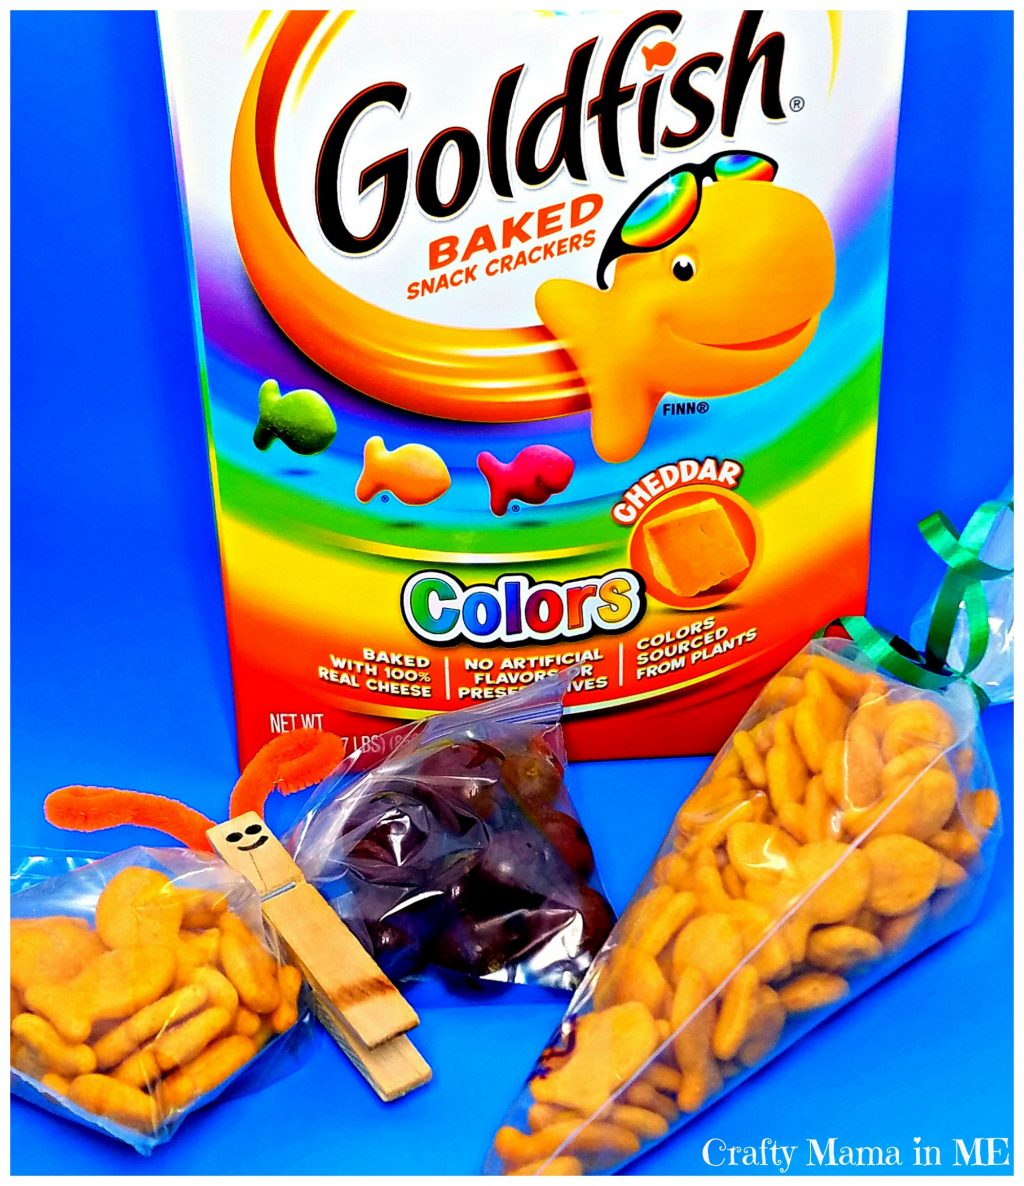 Spring is in the Air Goldfish® Hunt {Free Printables}